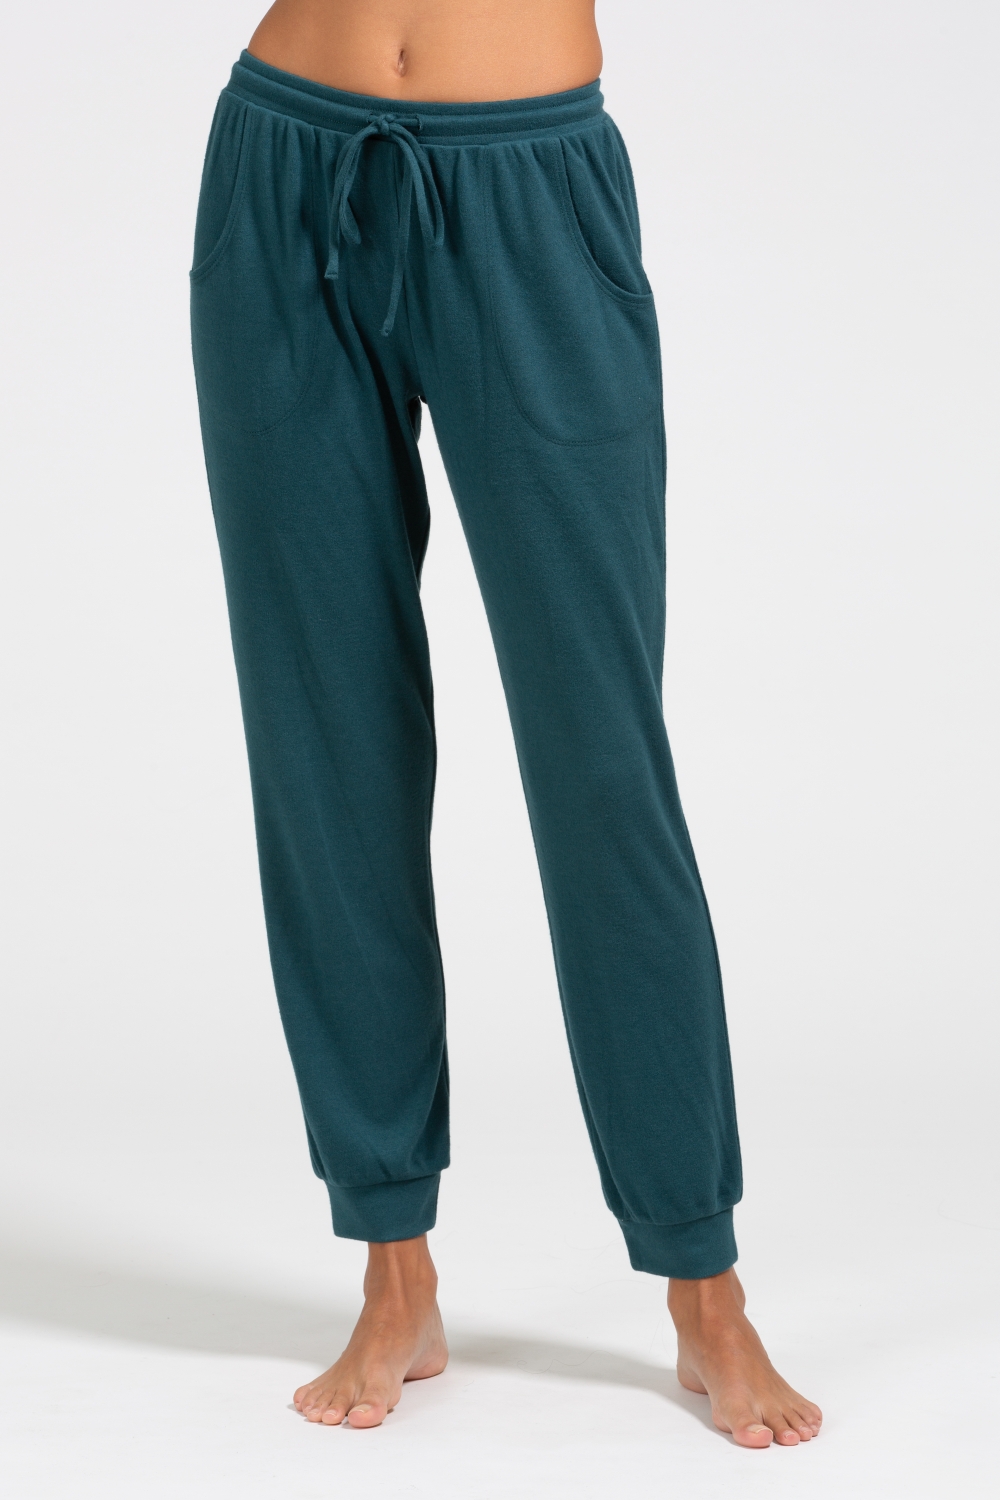 Eberjey Mina Runner Pant Evergreen: Small - PLAISIRS - Wellbeing and ...